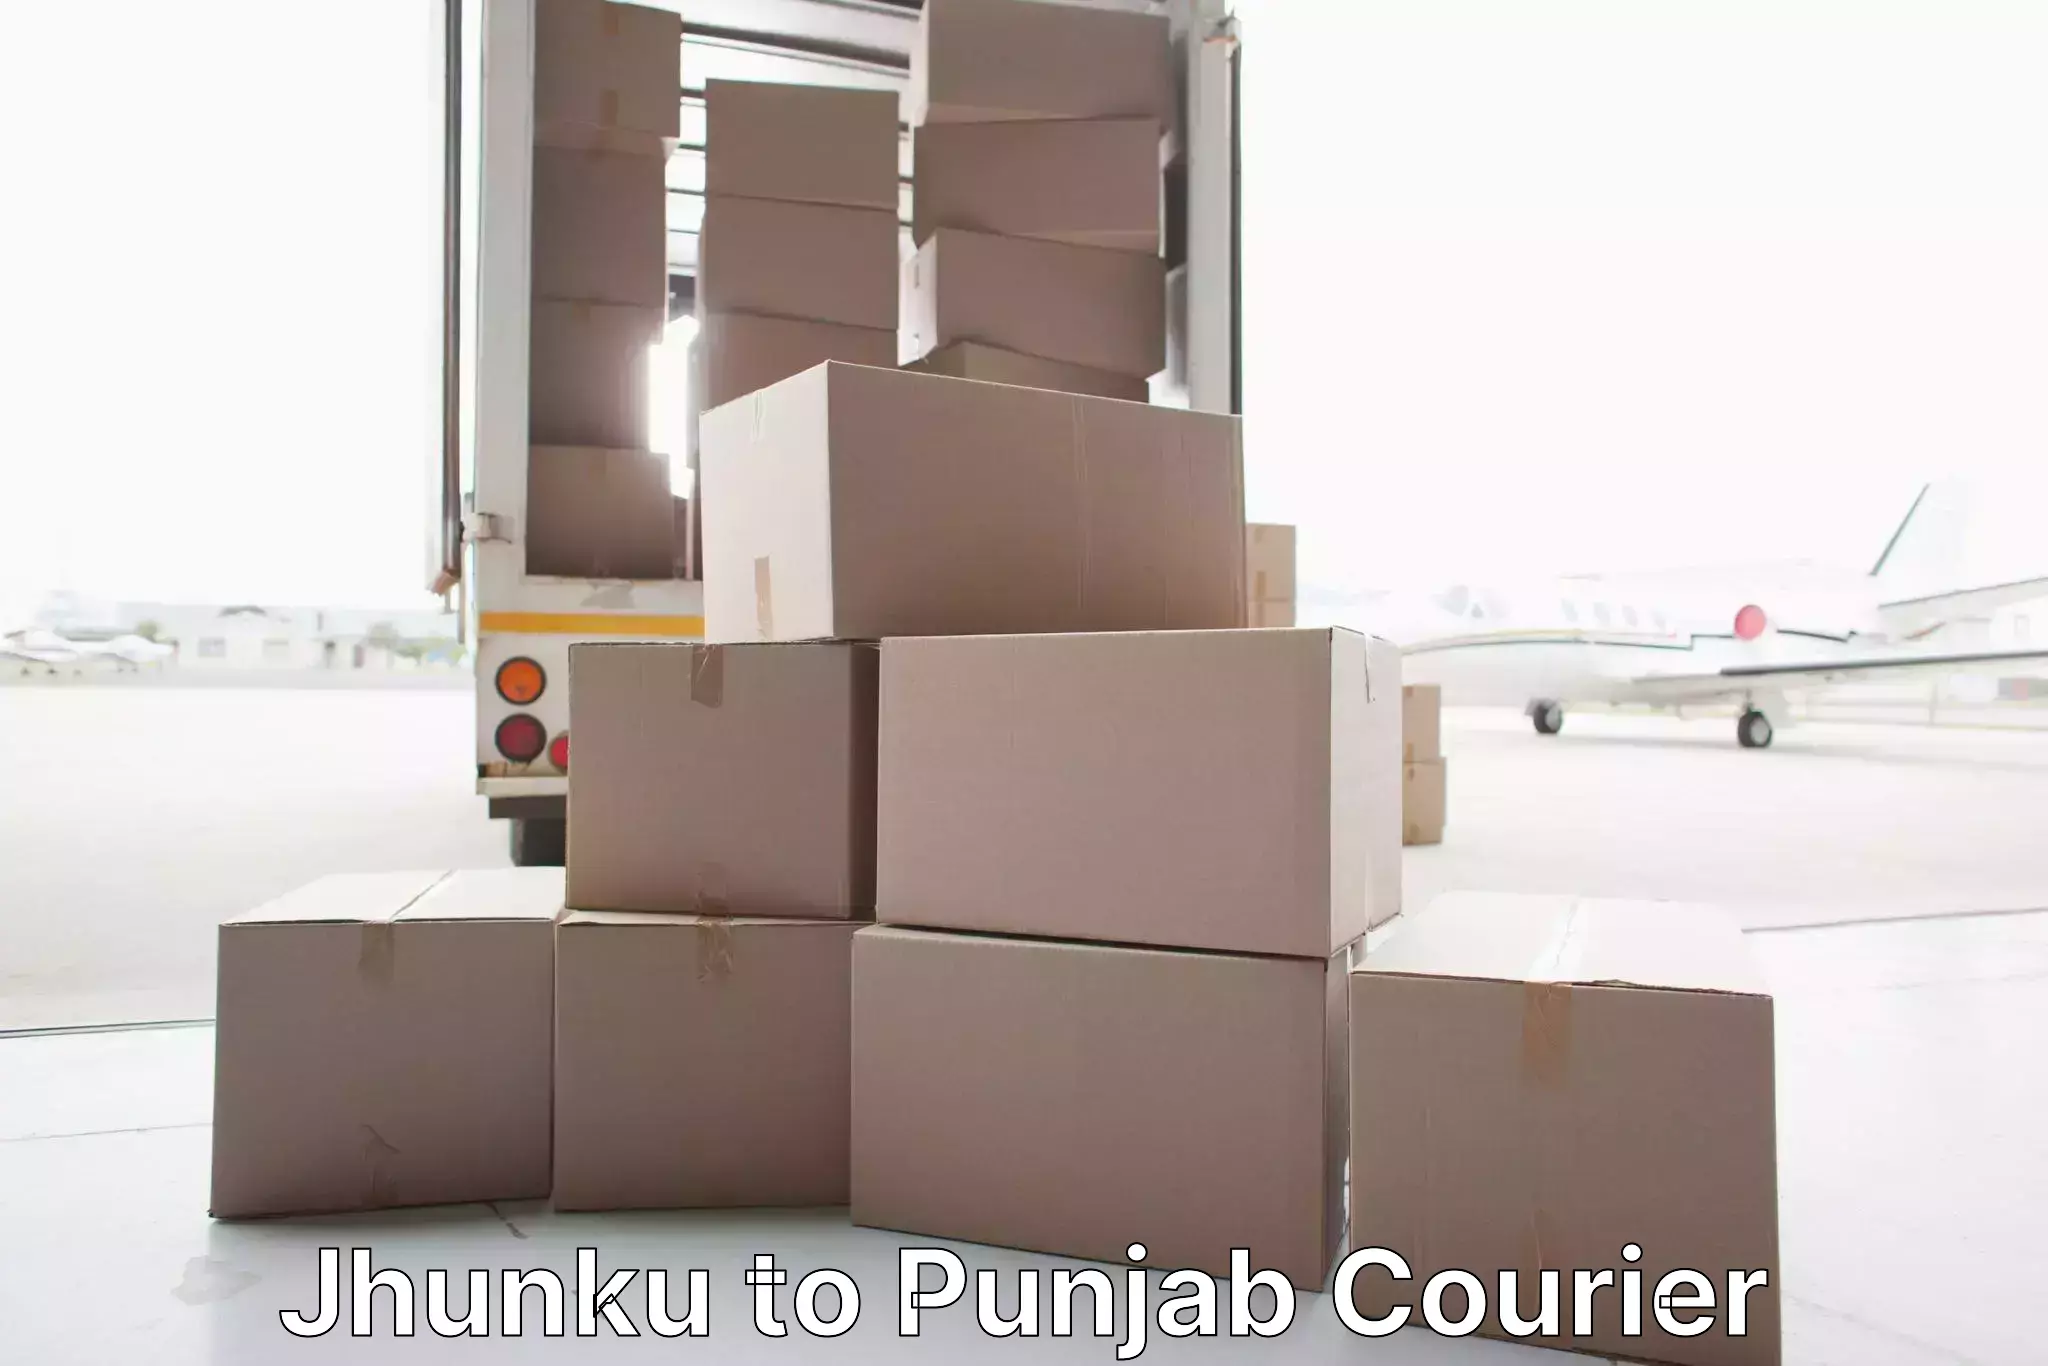 Efficient home relocation Jhunku to Punjab